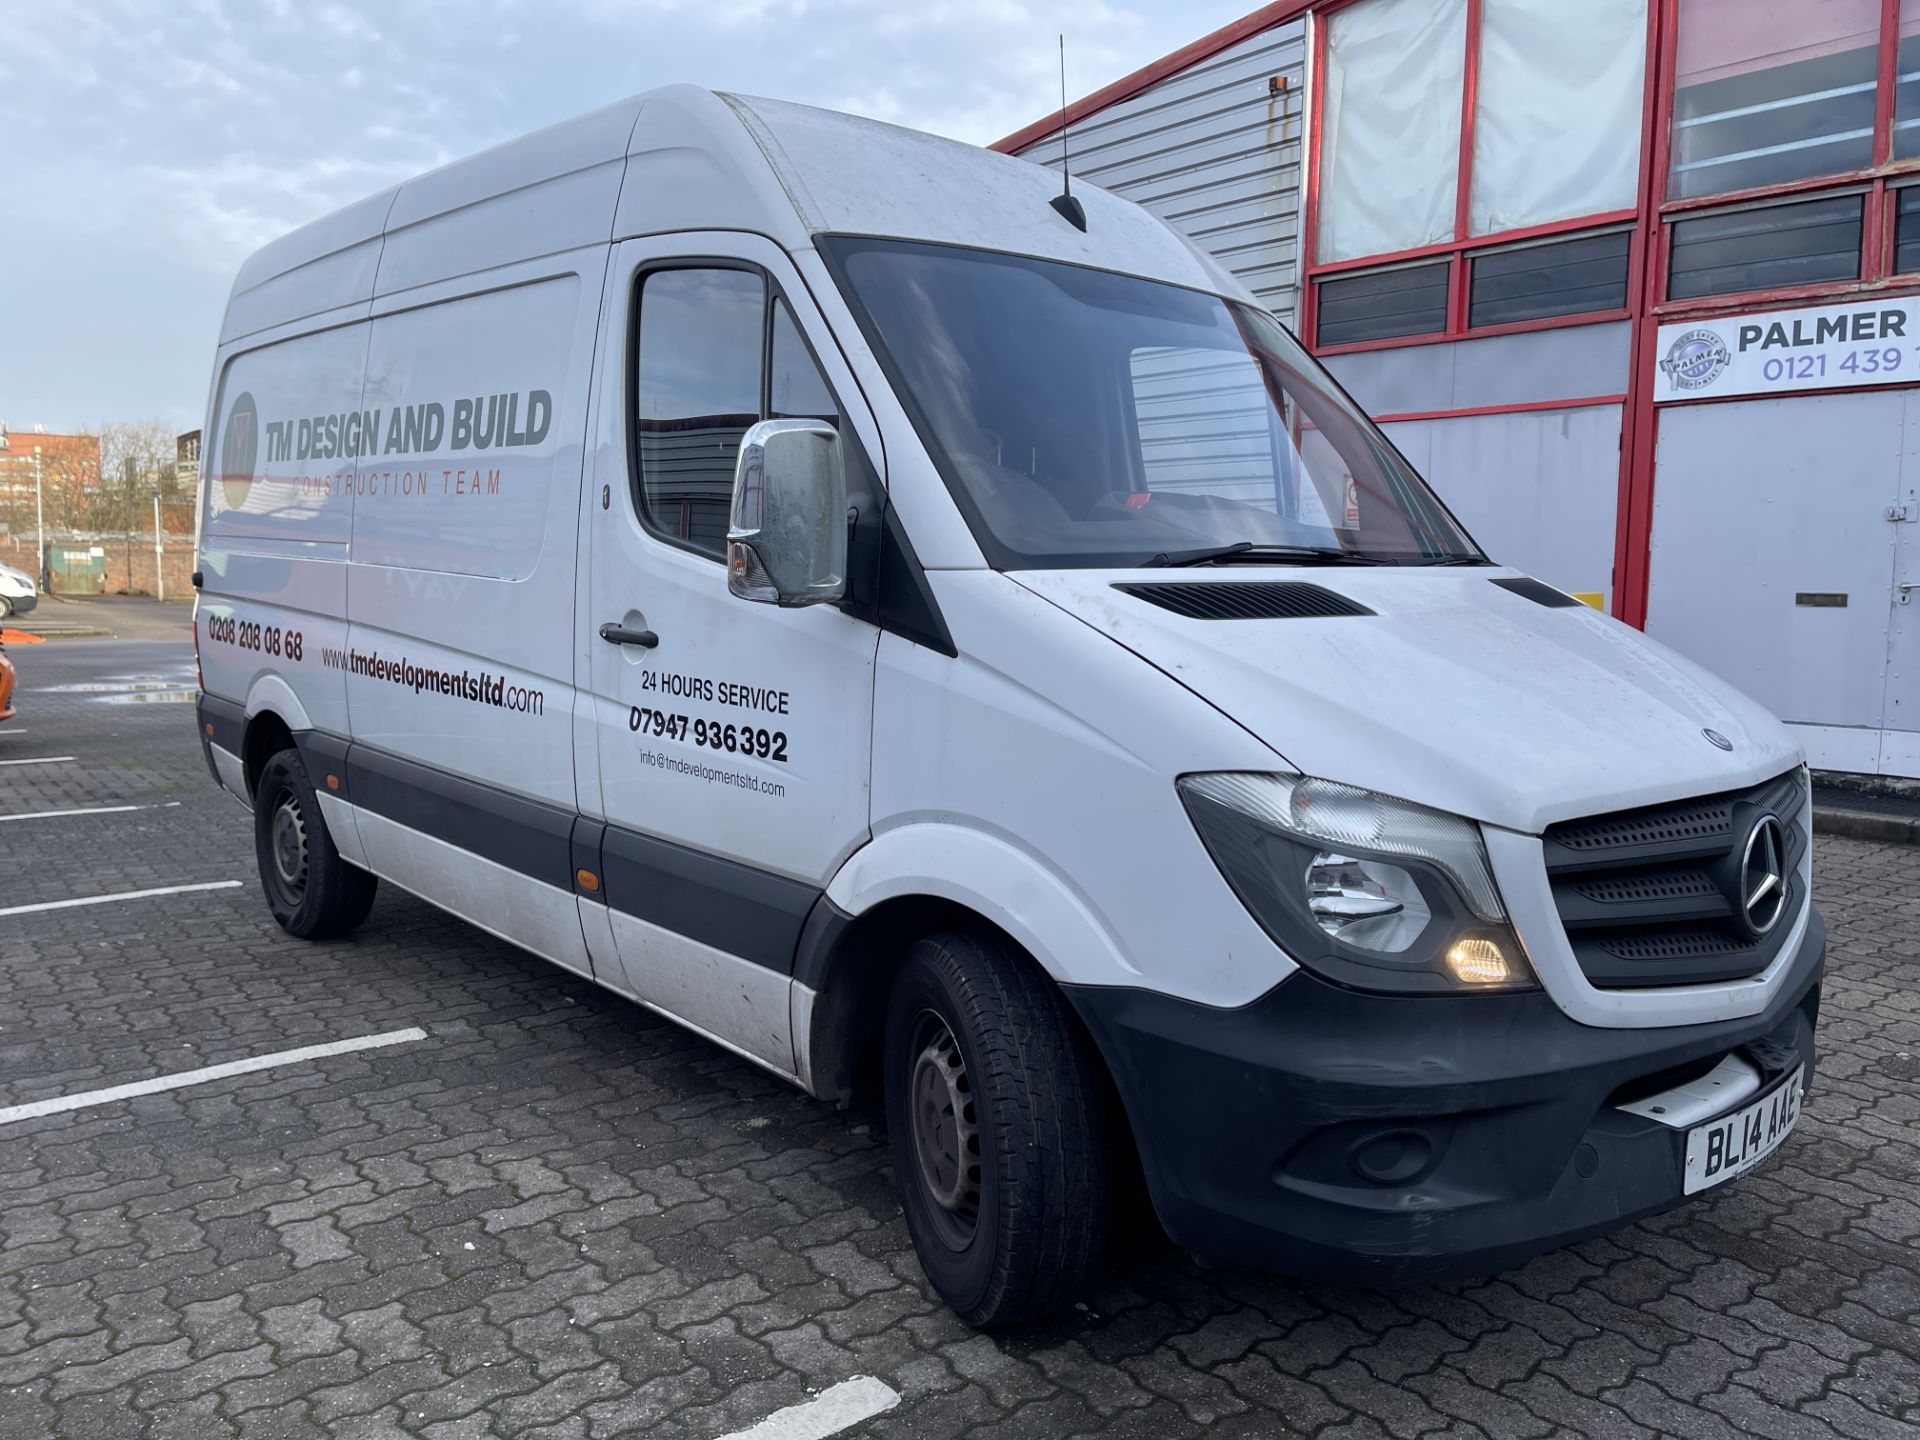 2014 - Mercedes Sprinter MWB - Facelift Model - Low Miles for Age - Image 11 of 39